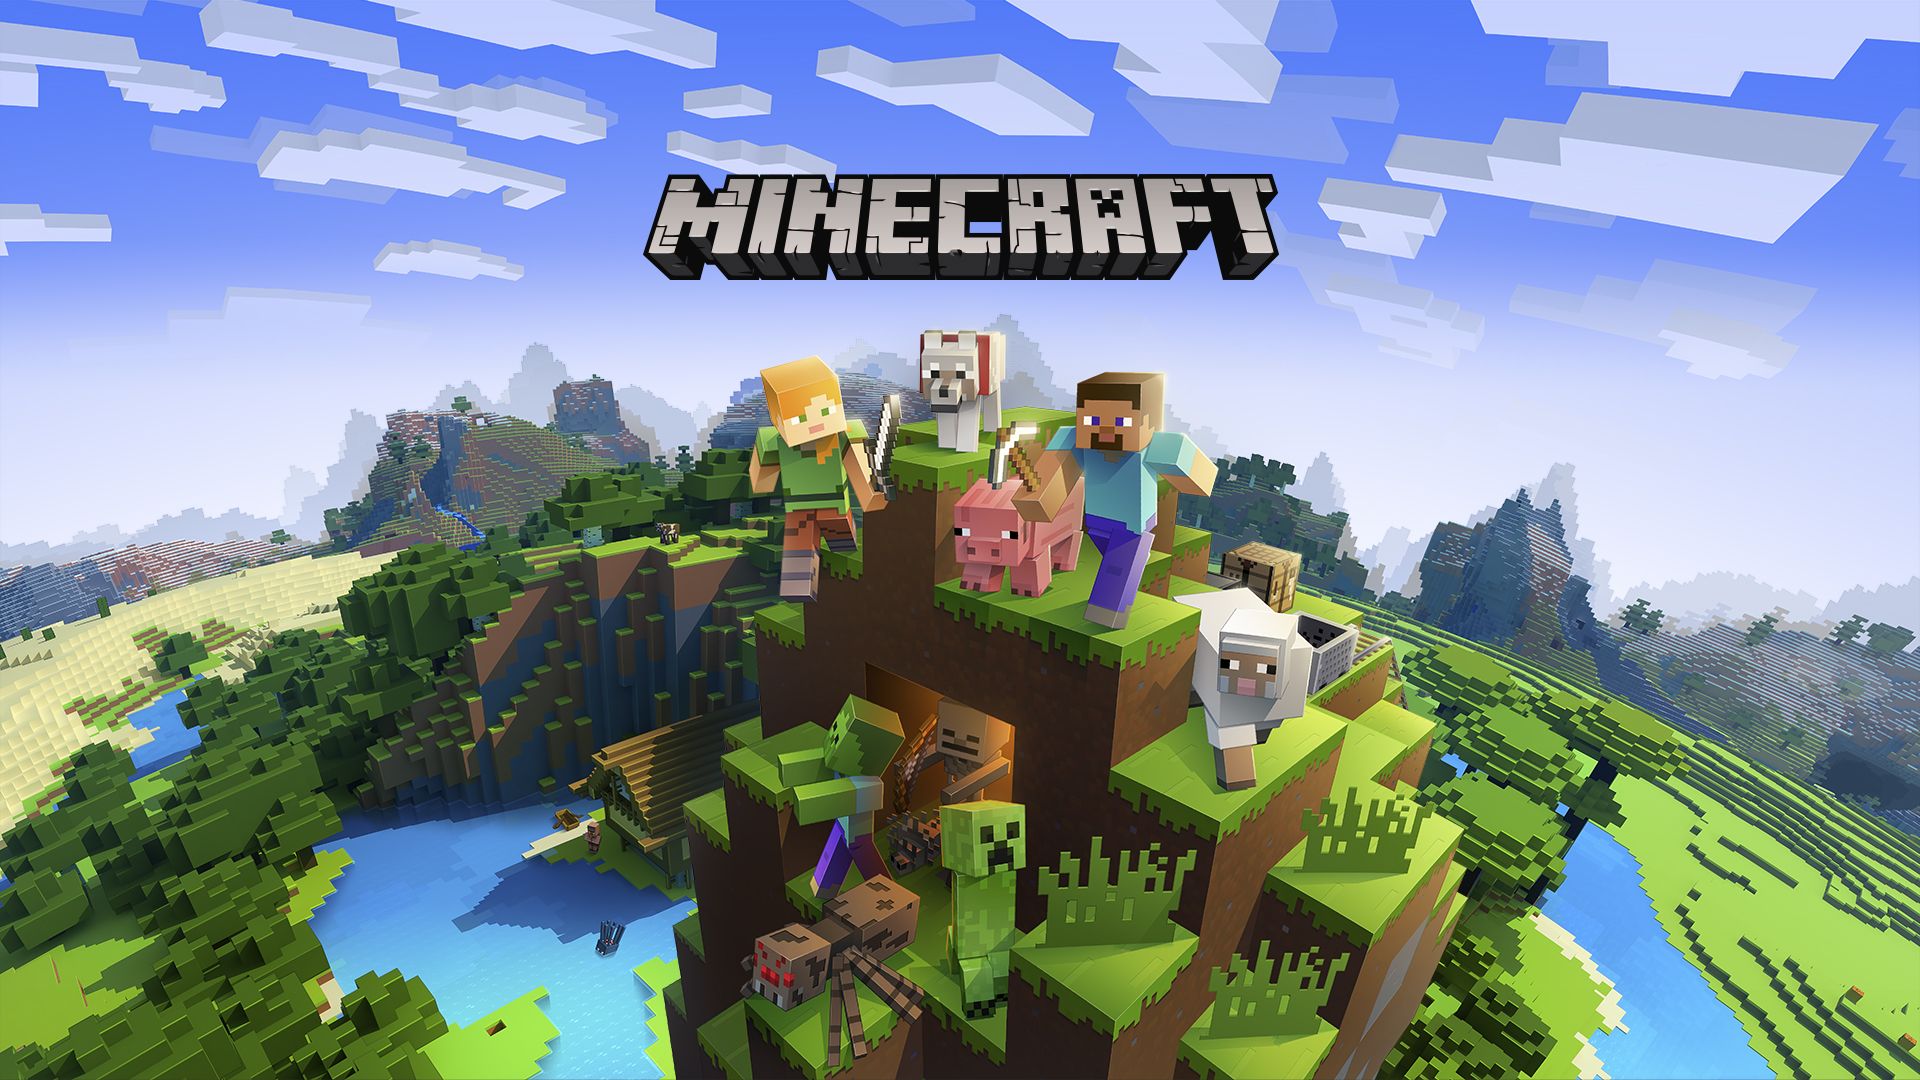 Minecraft for Nintendo Switch Game Details